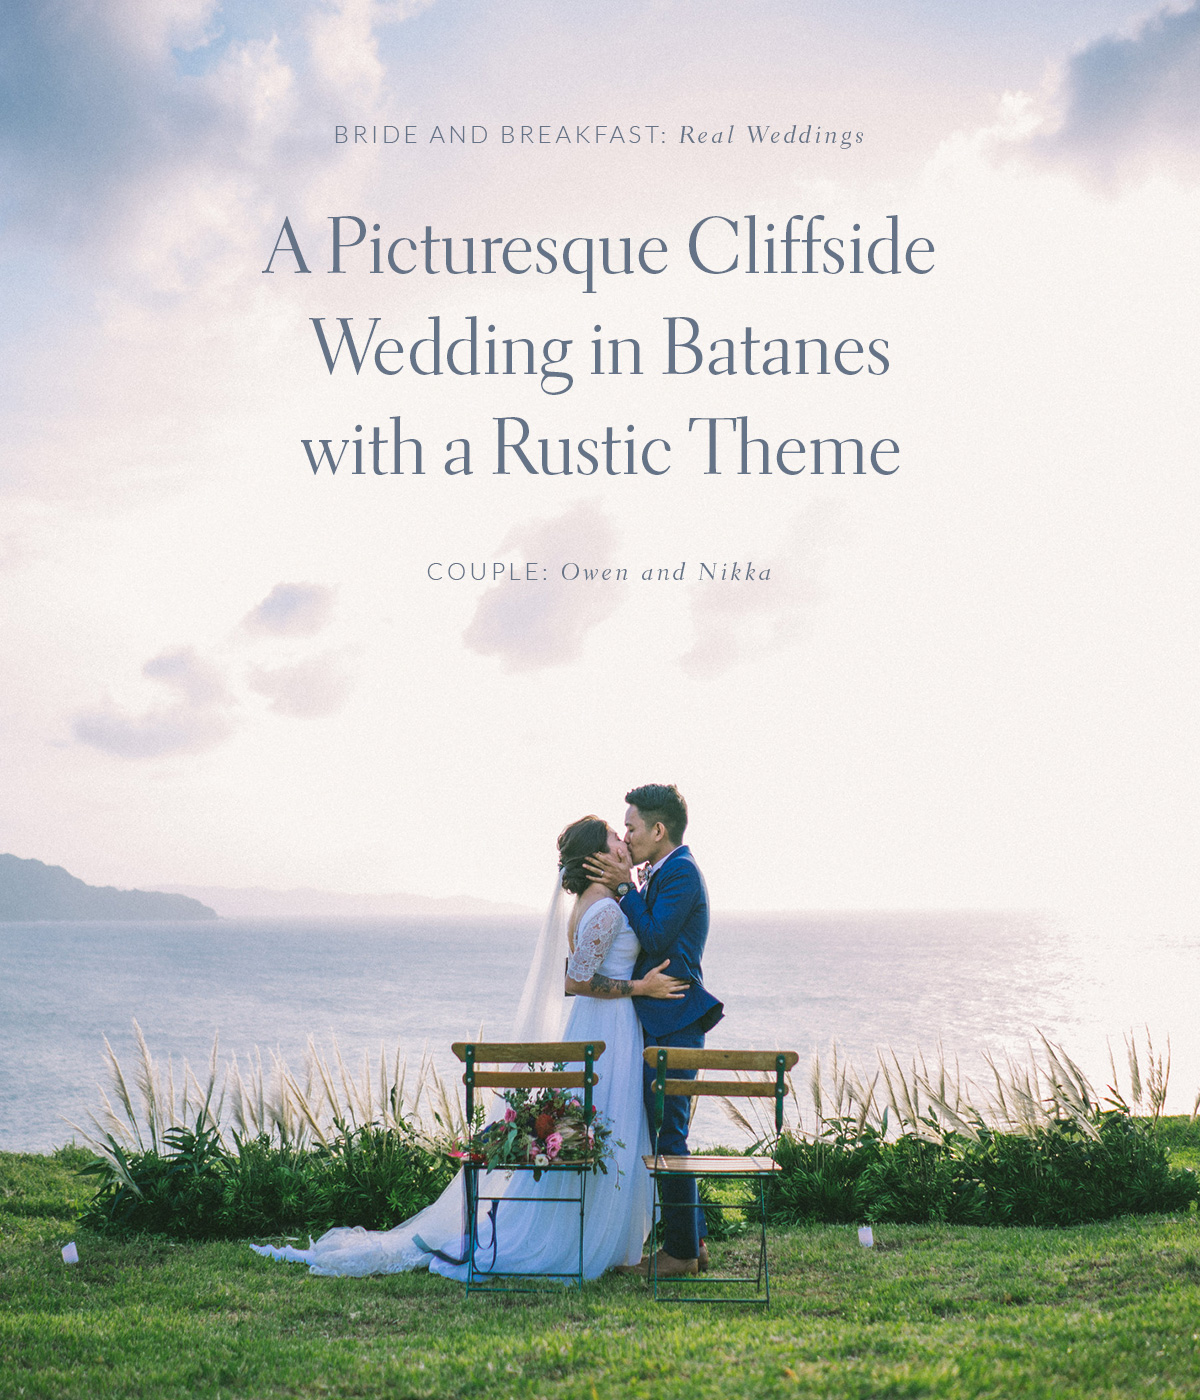 A Picturesque Cliffside Wedding in Batanes with a Rustic Theme